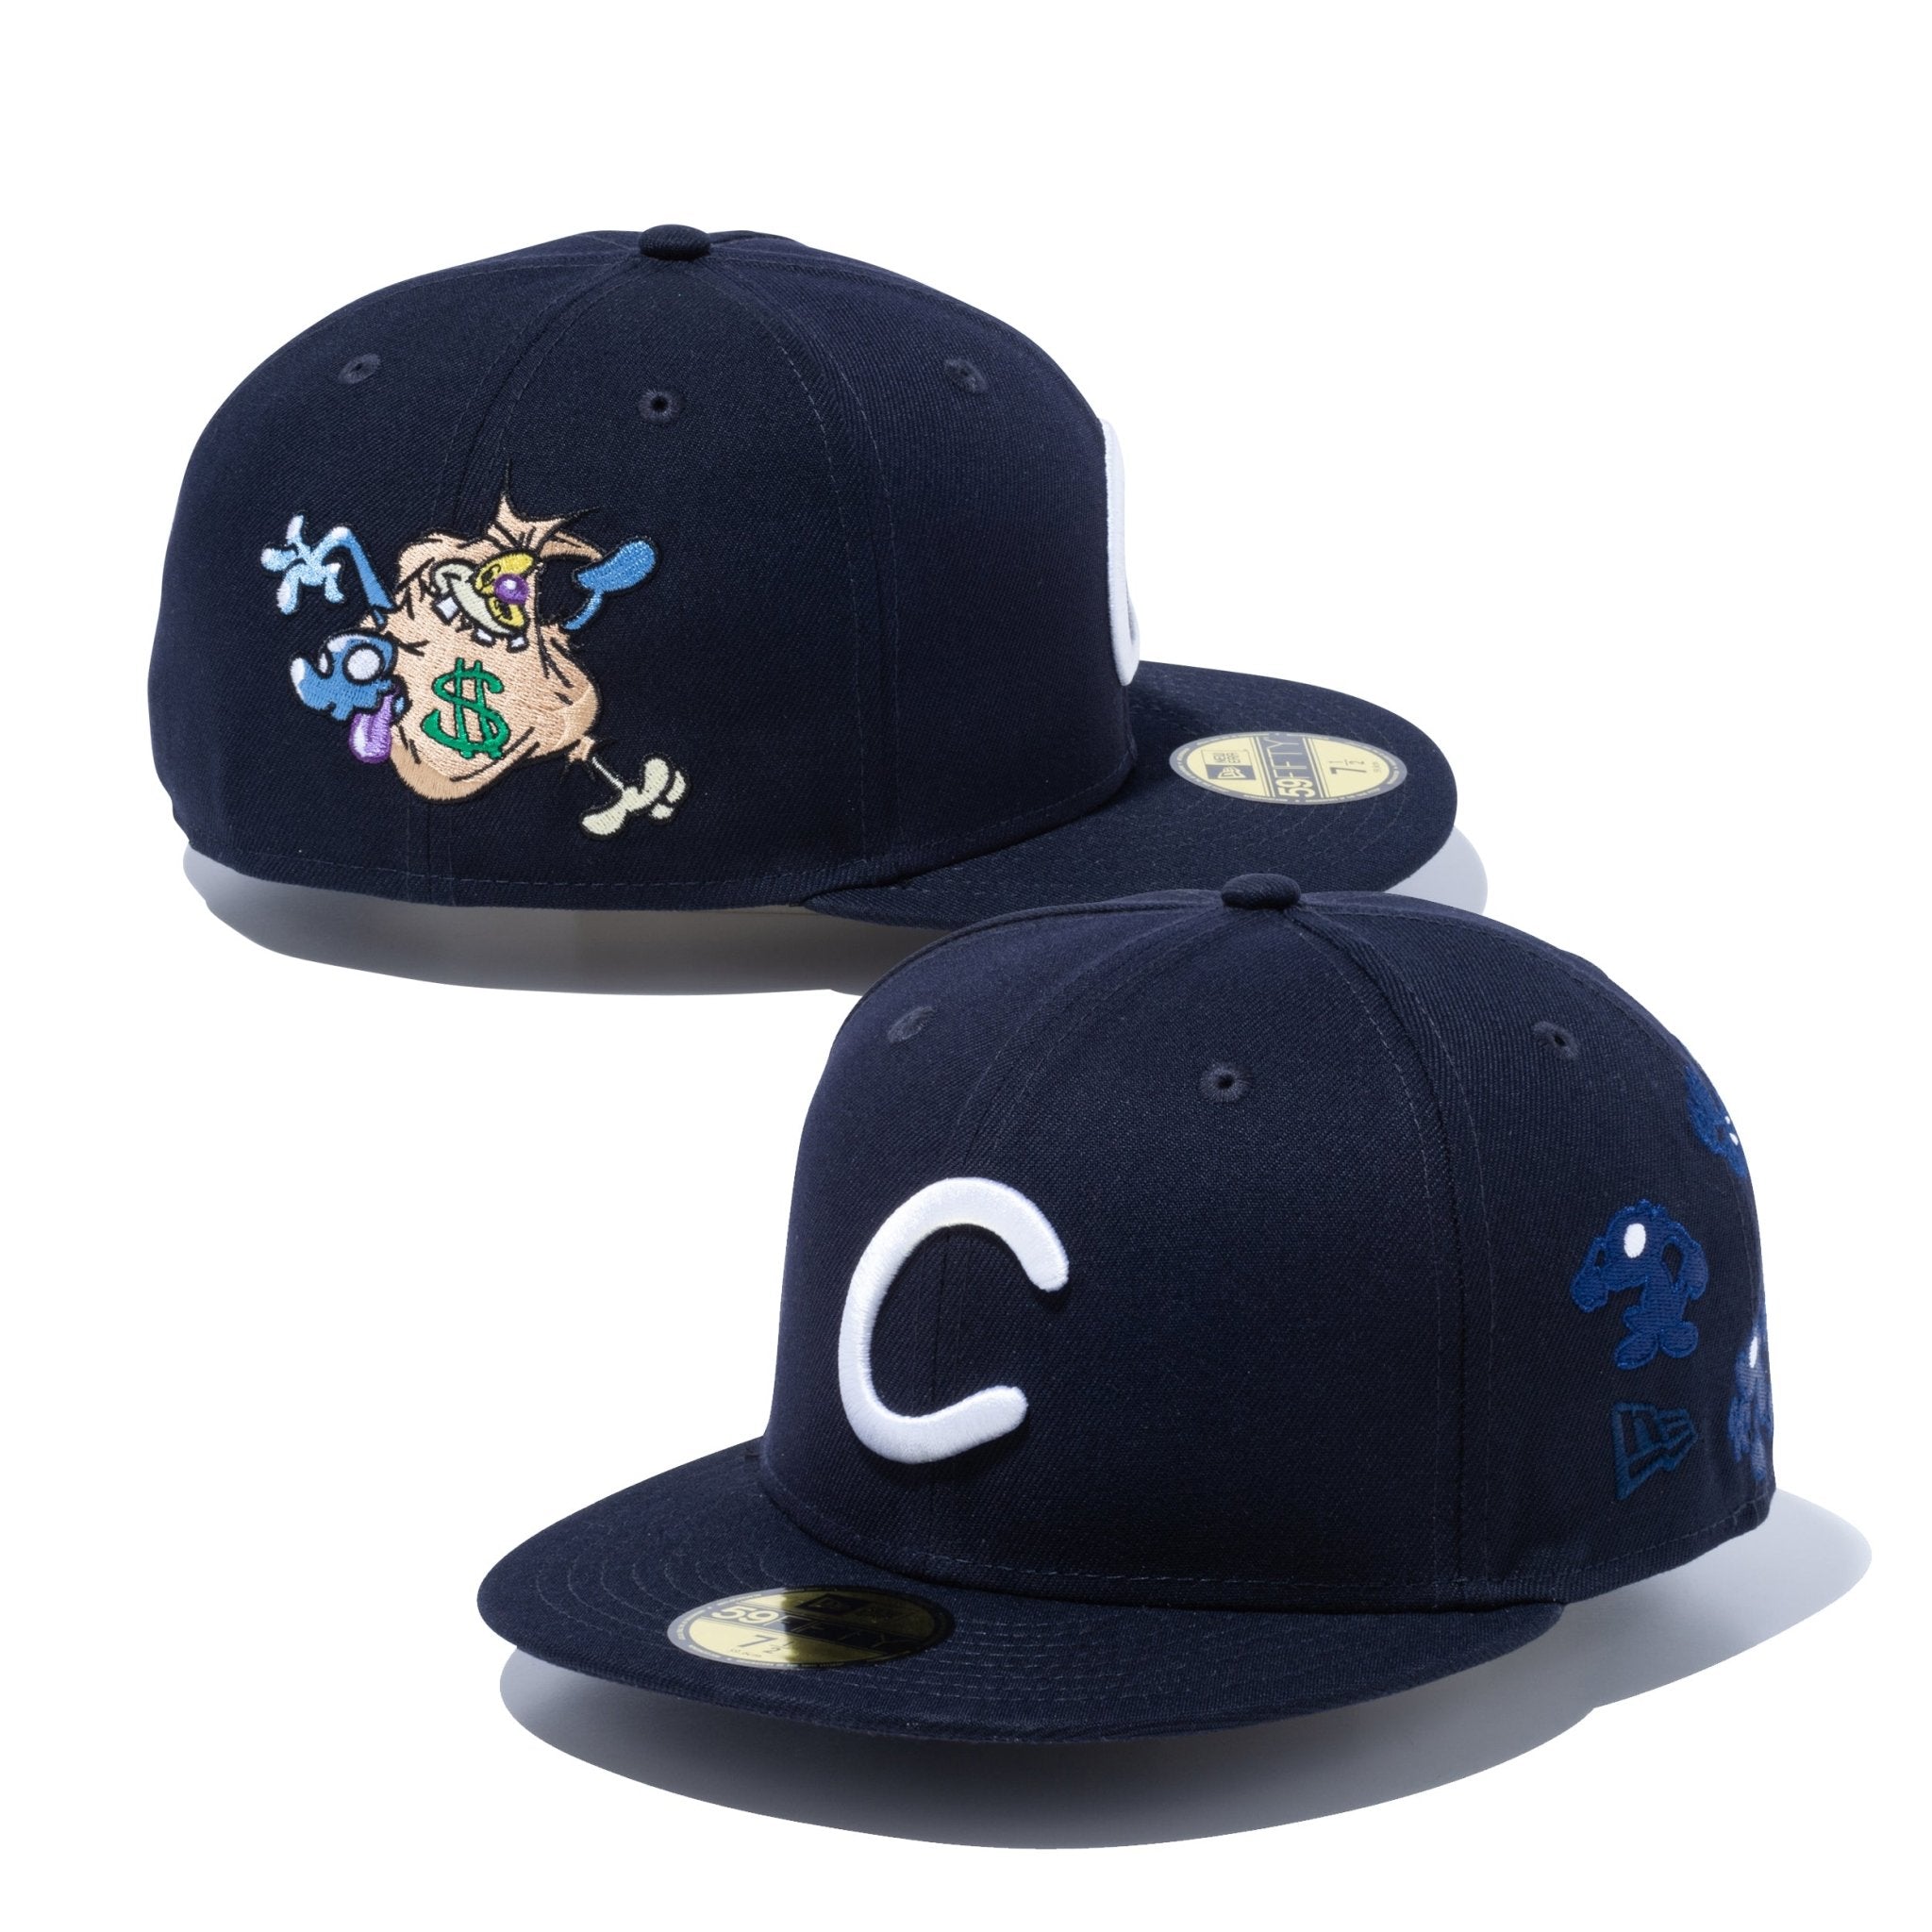 59FIFTY COIN PARKING DELIVERY Cロゴ ネイビー | ニューエラ